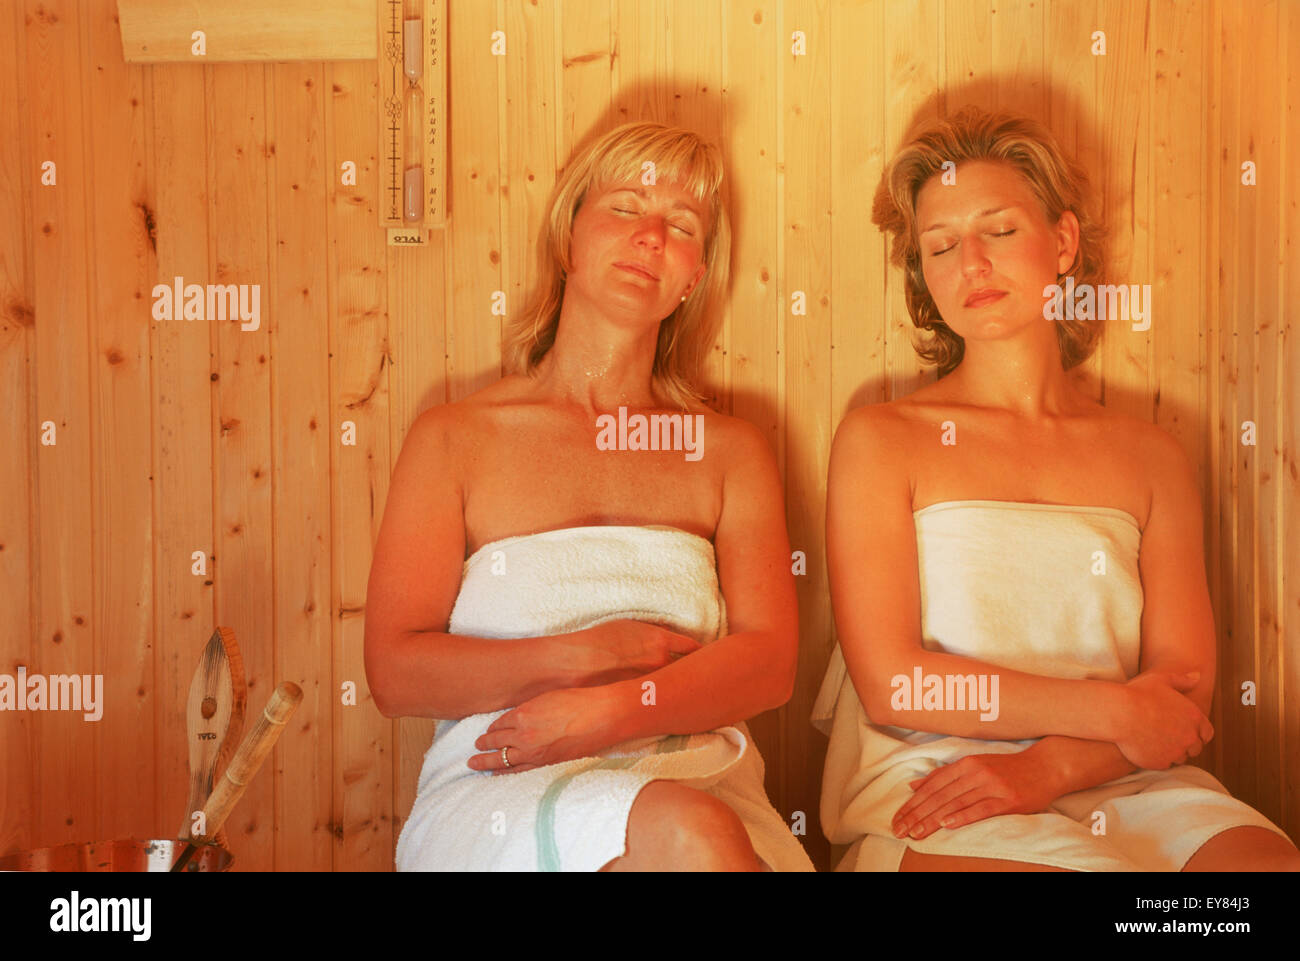 Two women sitting inside traditional wooden sauna in Sweden Stock Photo